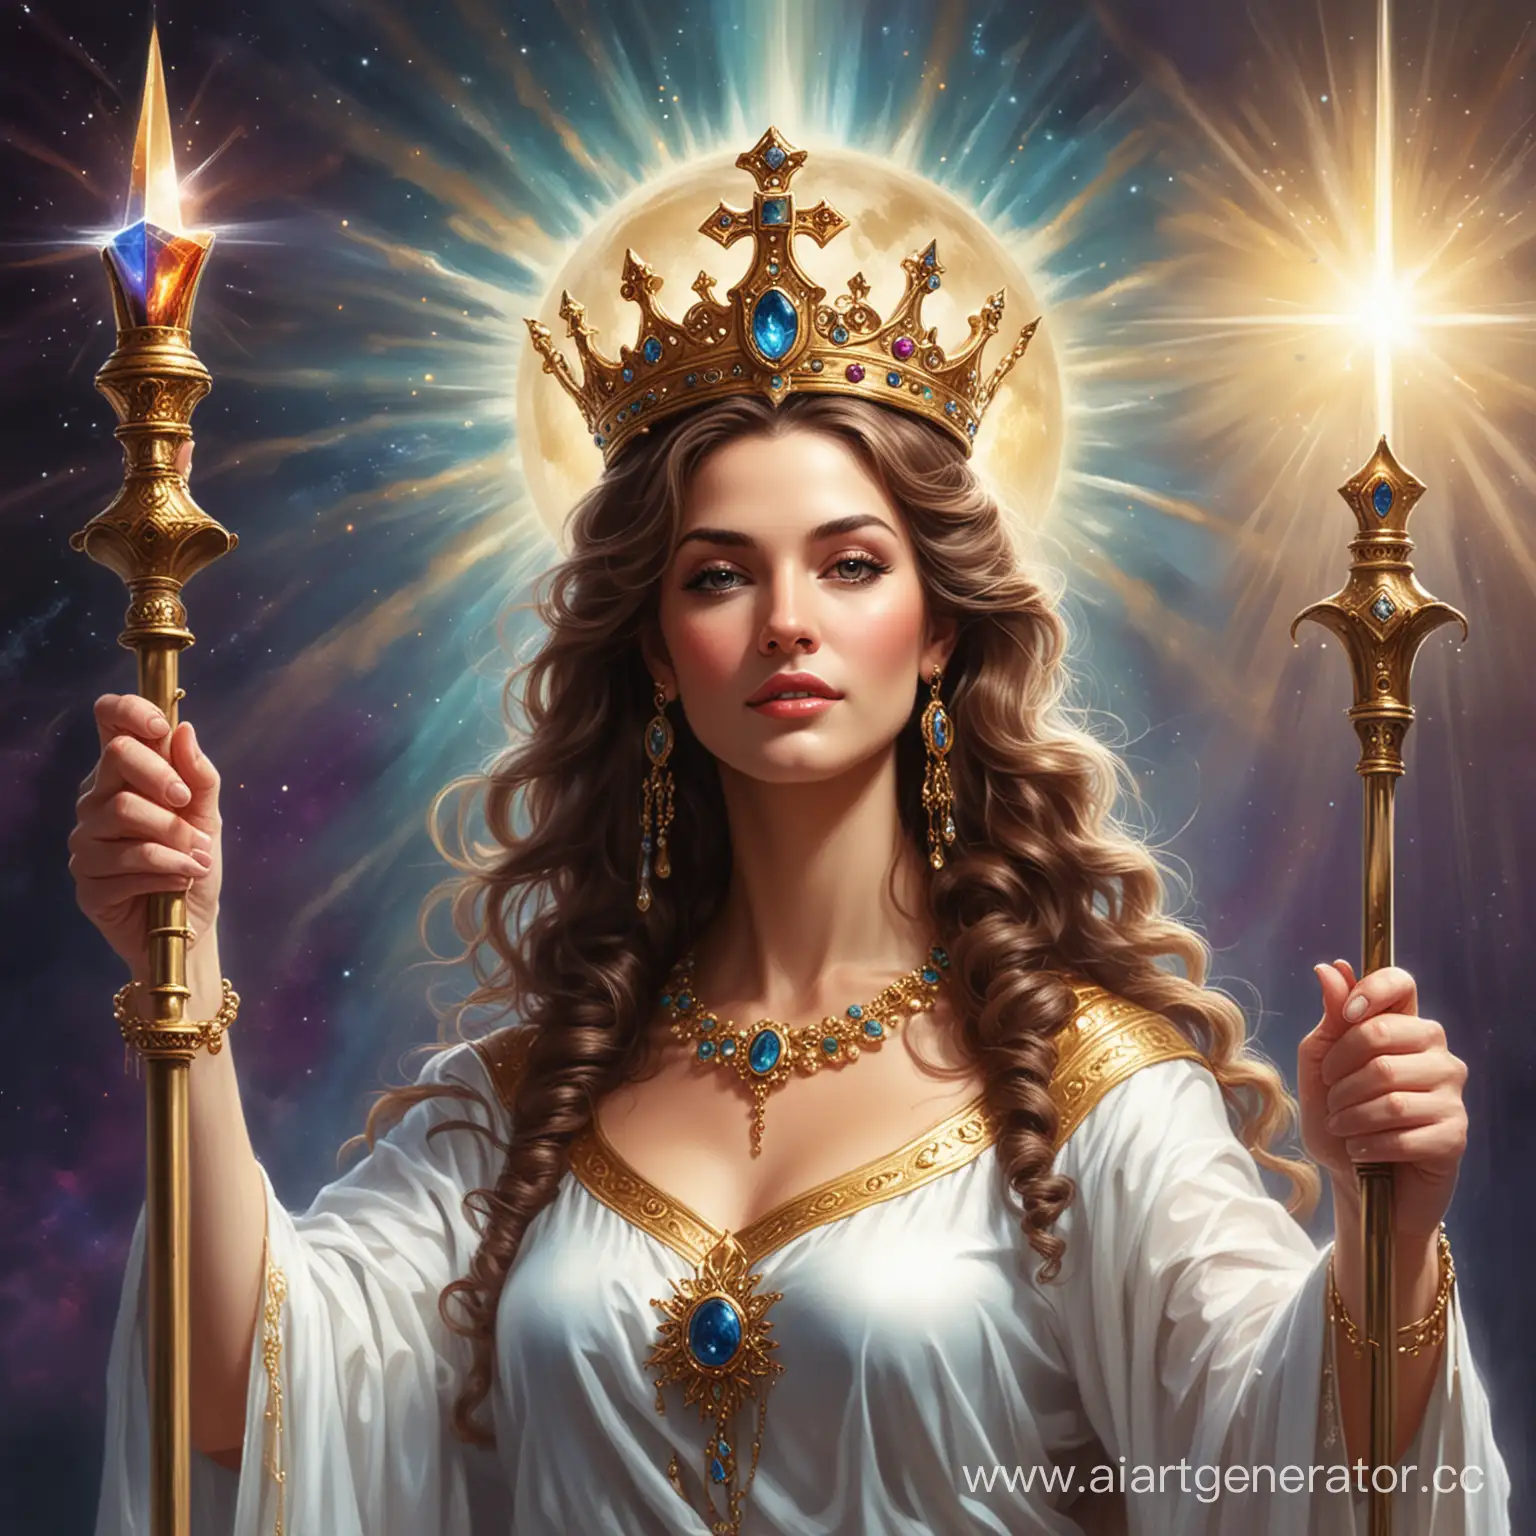 Goddess-Reconnecting-Scepters-of-Negativity-to-Positivity